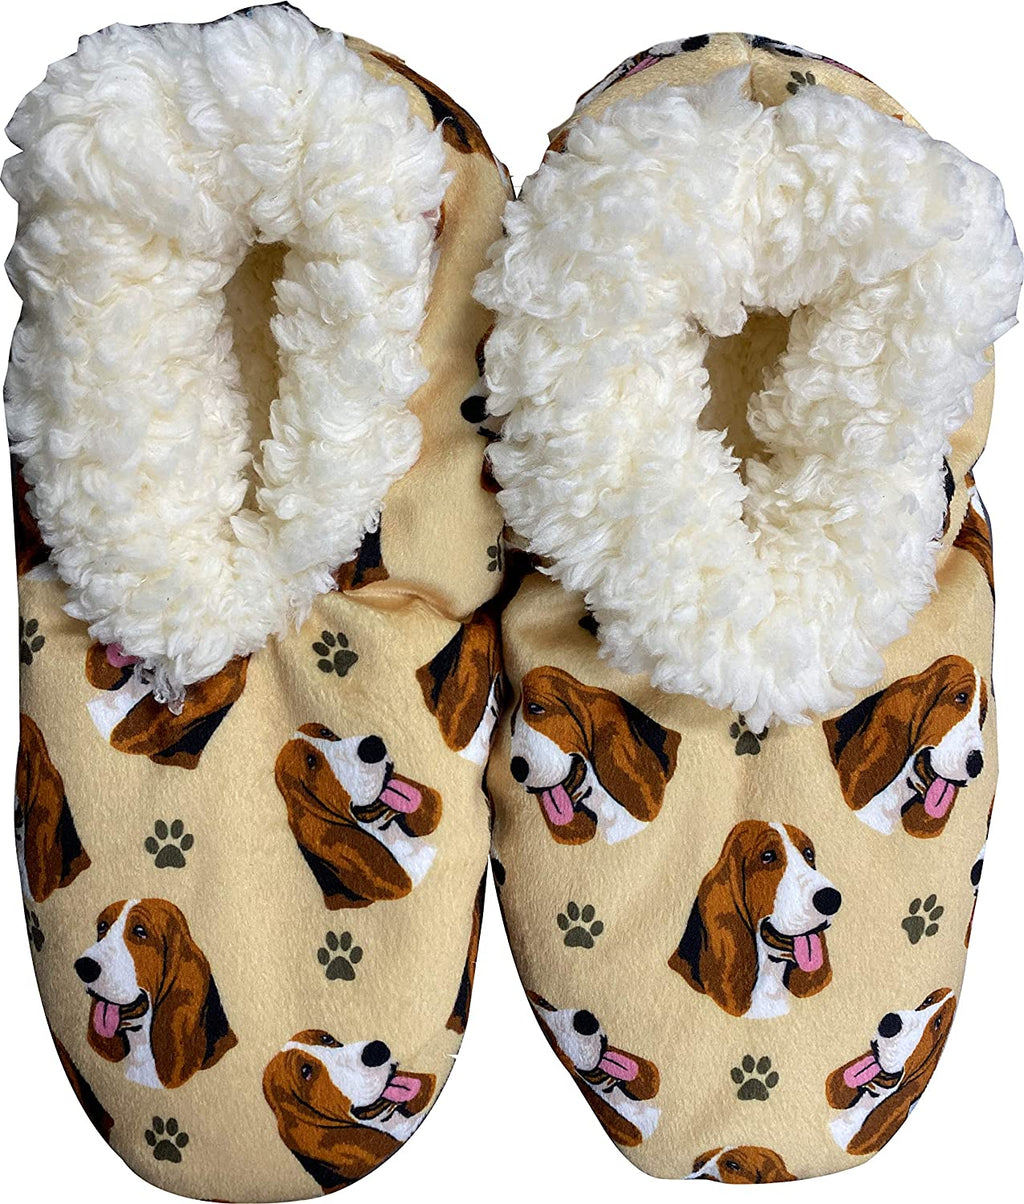 Basset Hound Slippers - Comfies  (Fabric Colors Vary)